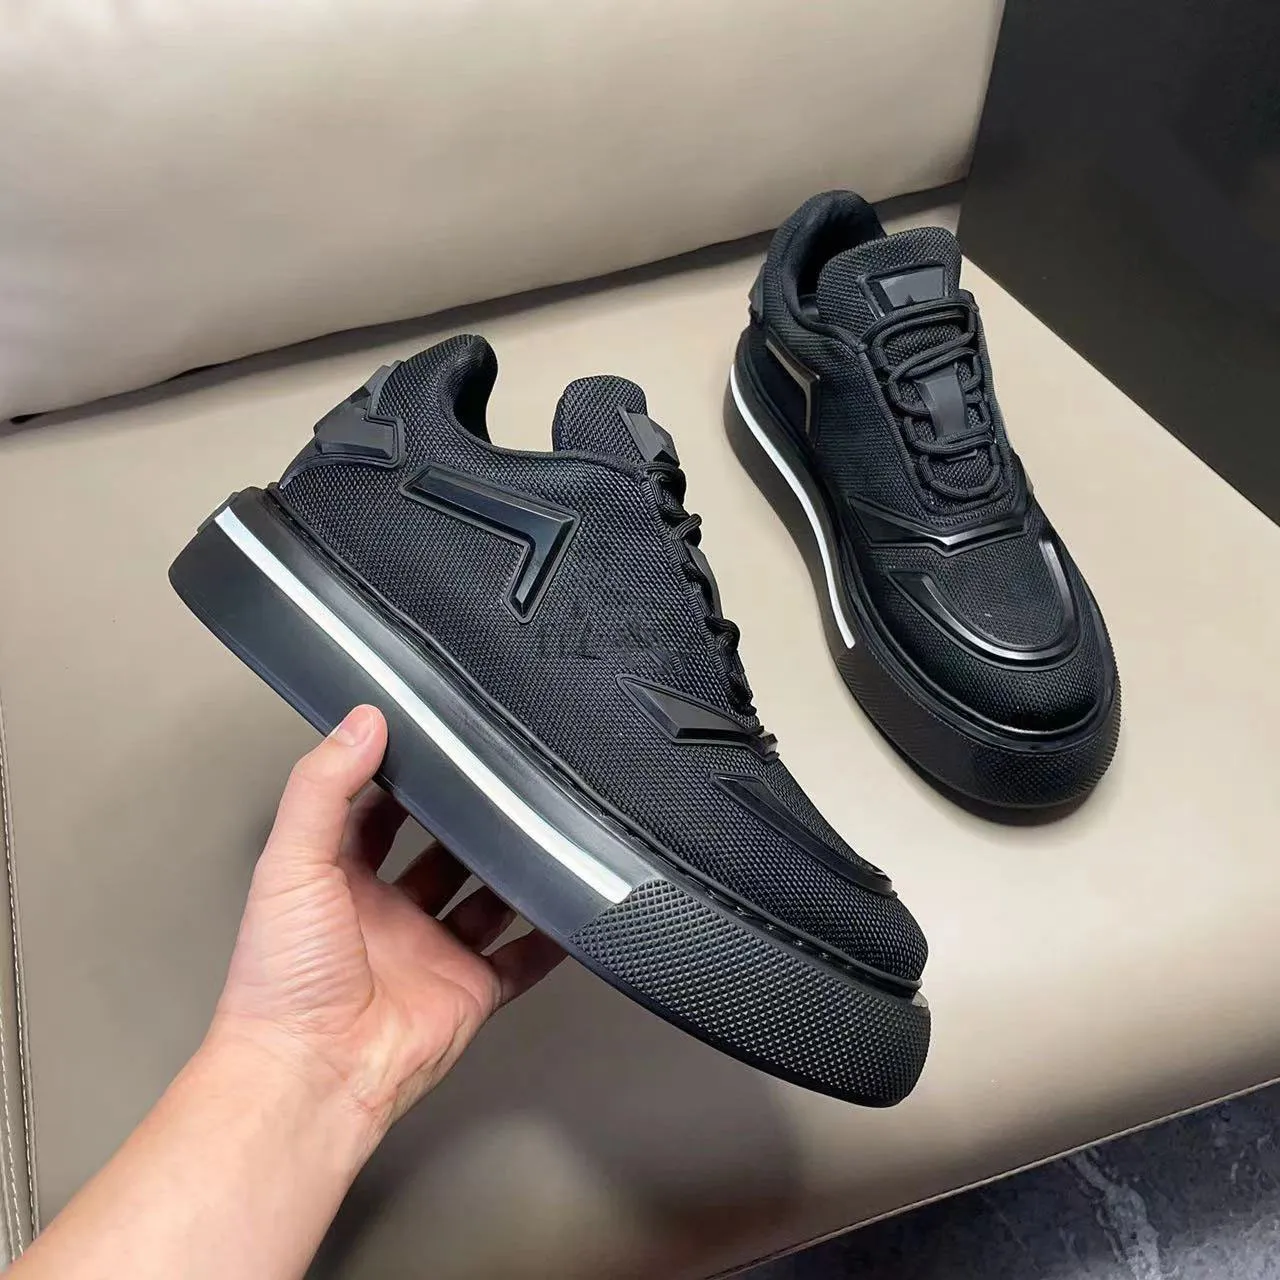 Popular Casual-stylish Sneakers Shoes Re-Nylon Brushed Leather Men Knit Fabric Runner Mesh Runner Trainers Man Sports Outdoor Walking EU38-46 3.20 18